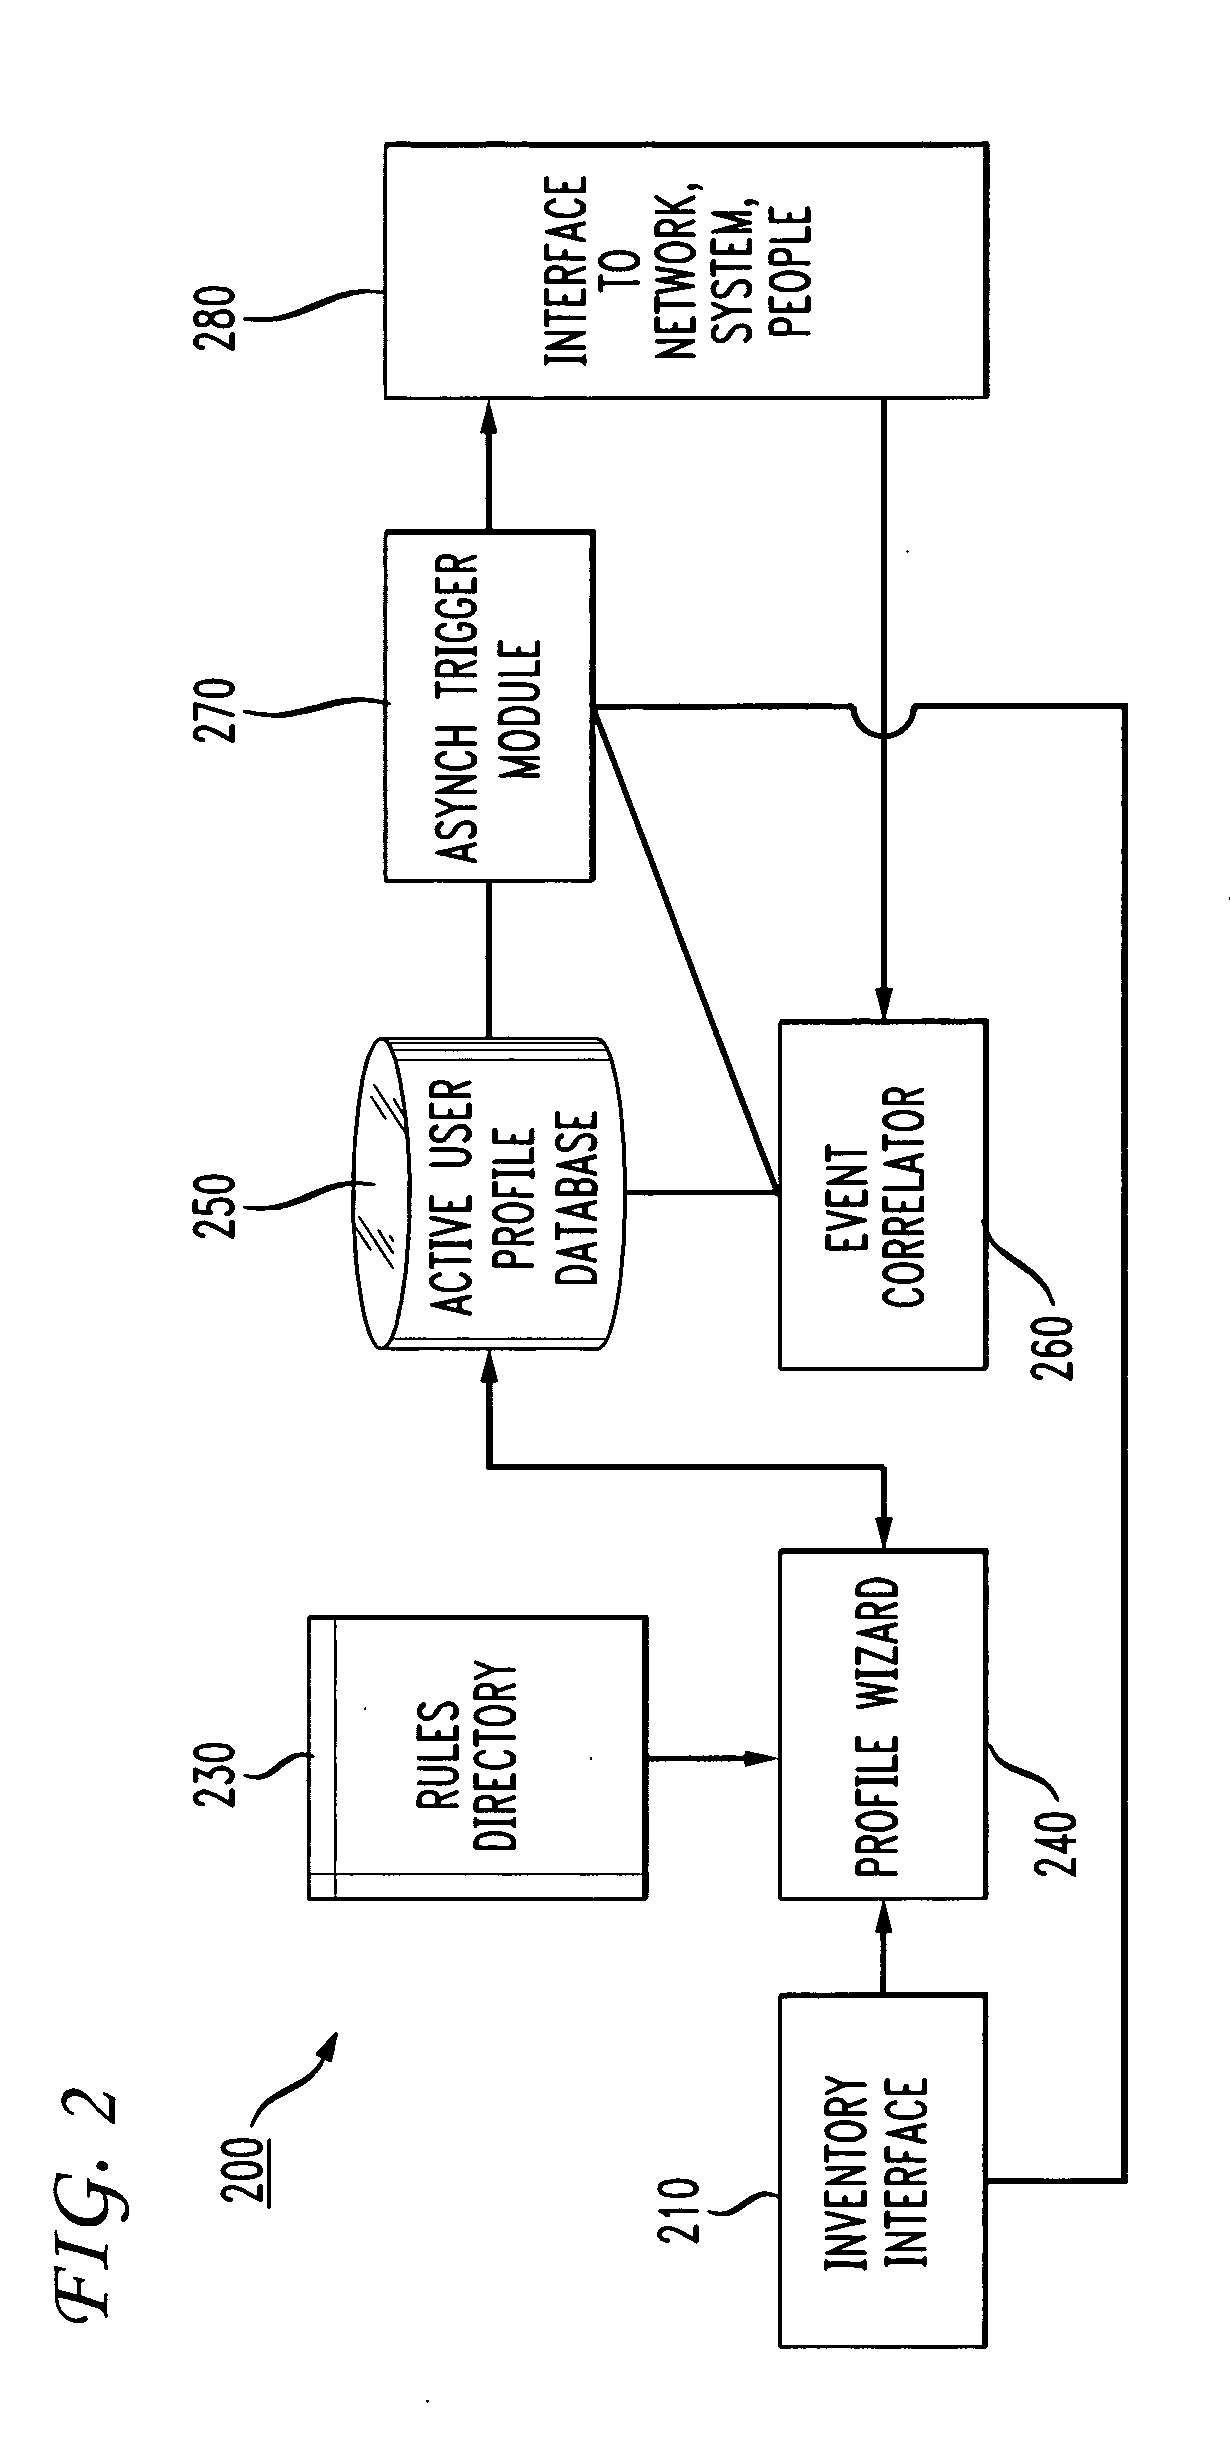 Methods and apparatus for directory enabled network services